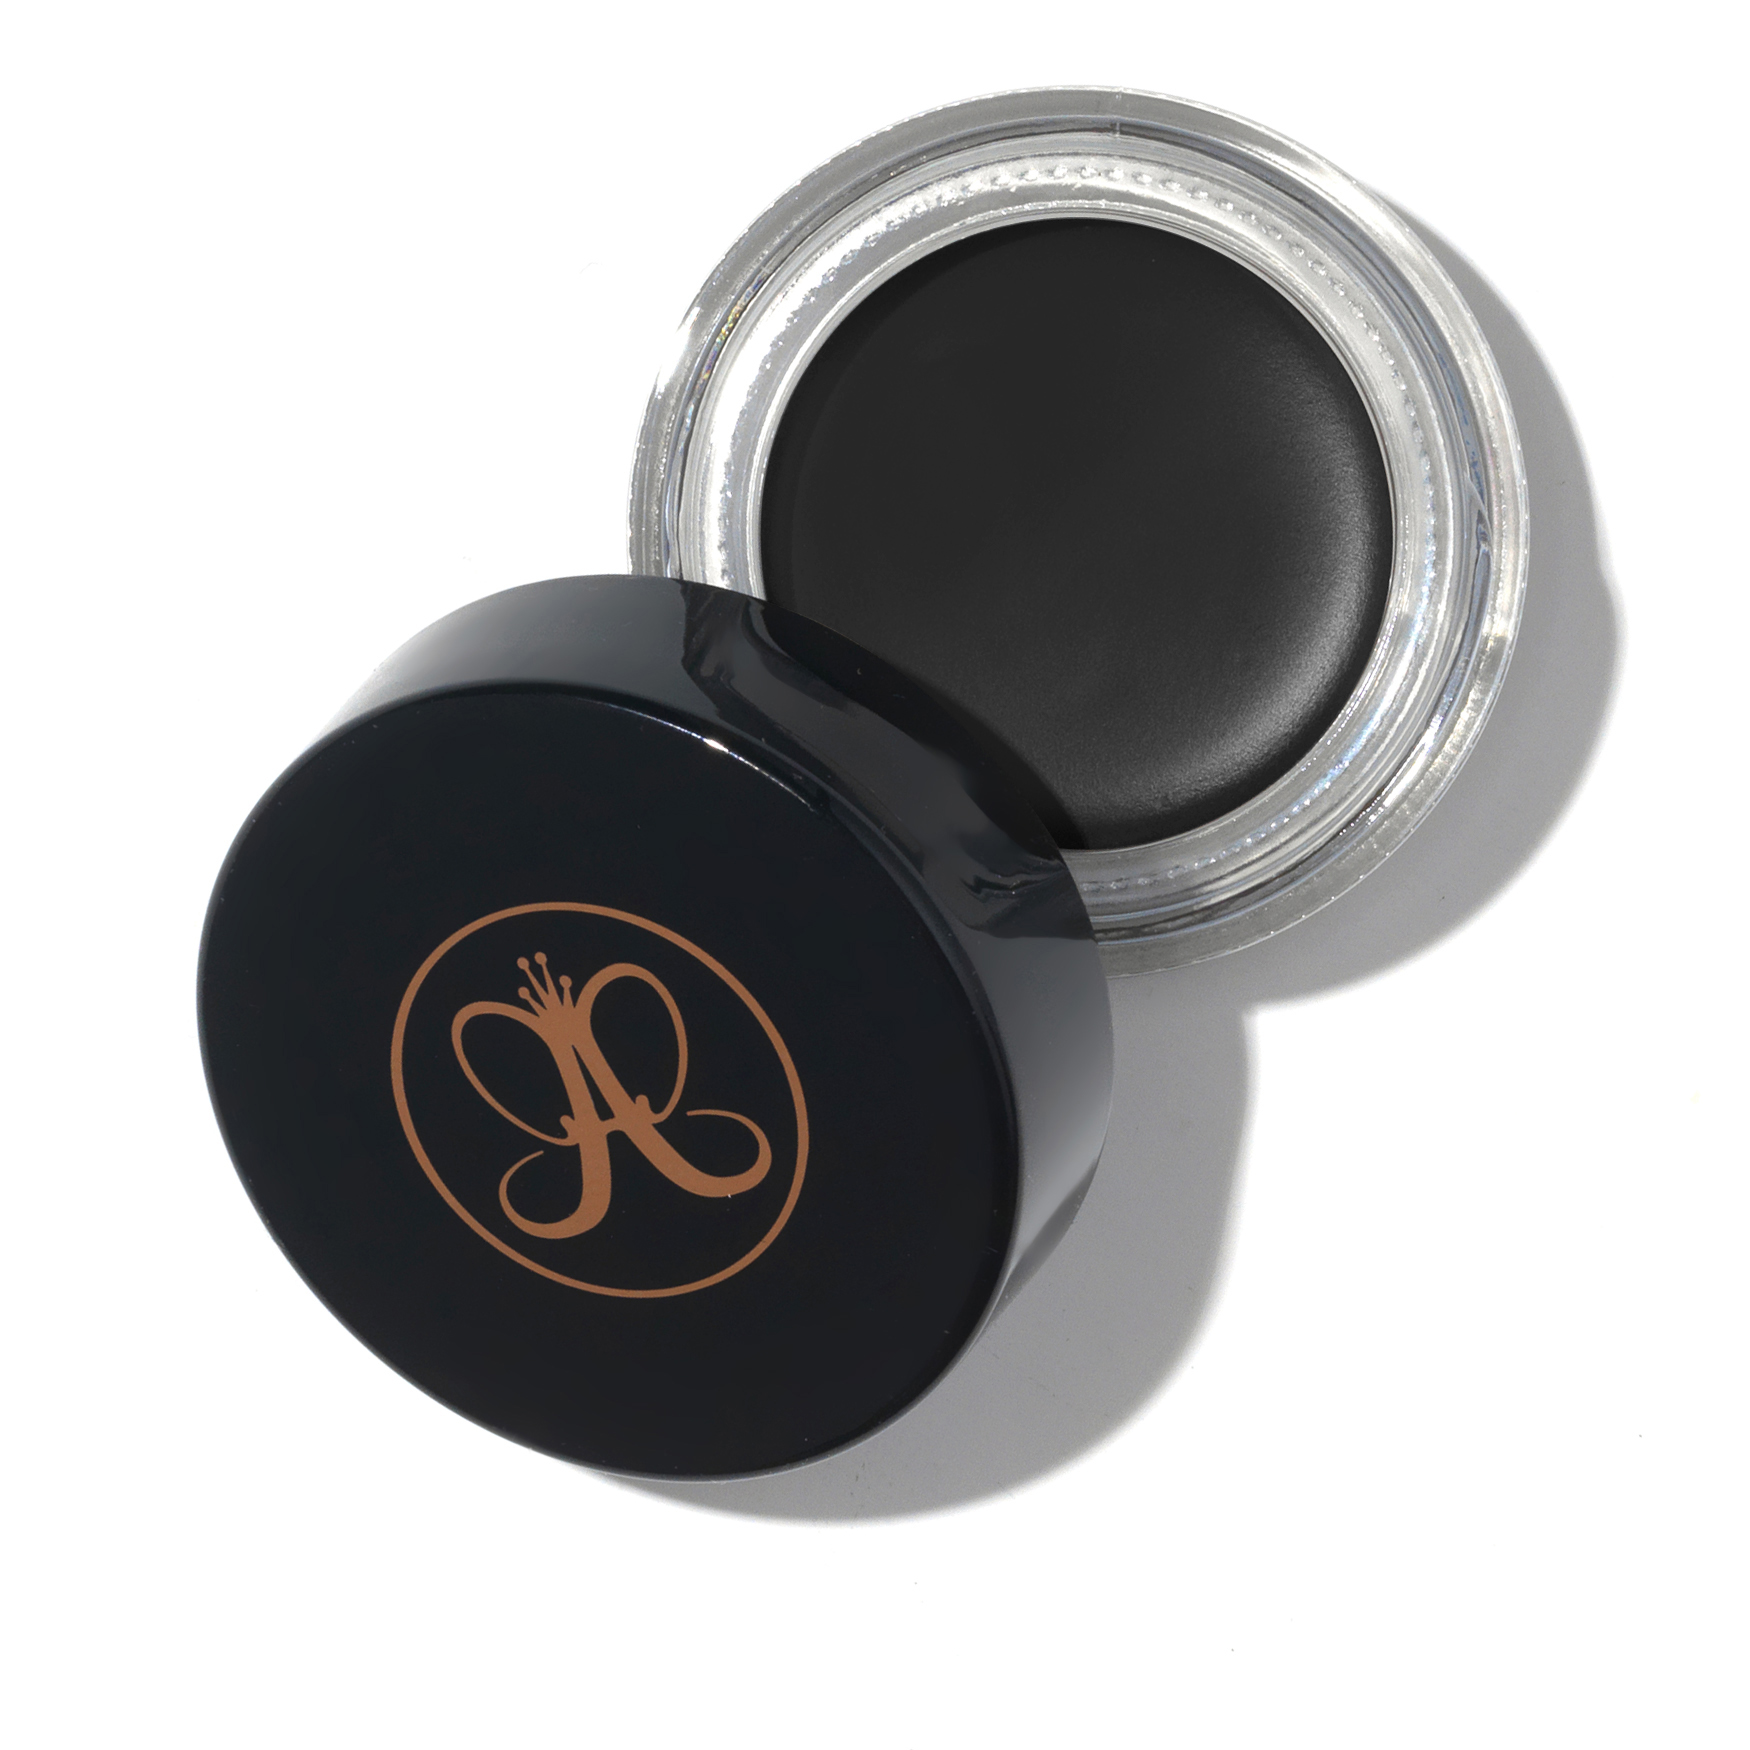 Anastasia Beverly Hills Waterproof Crème Color | Space NK